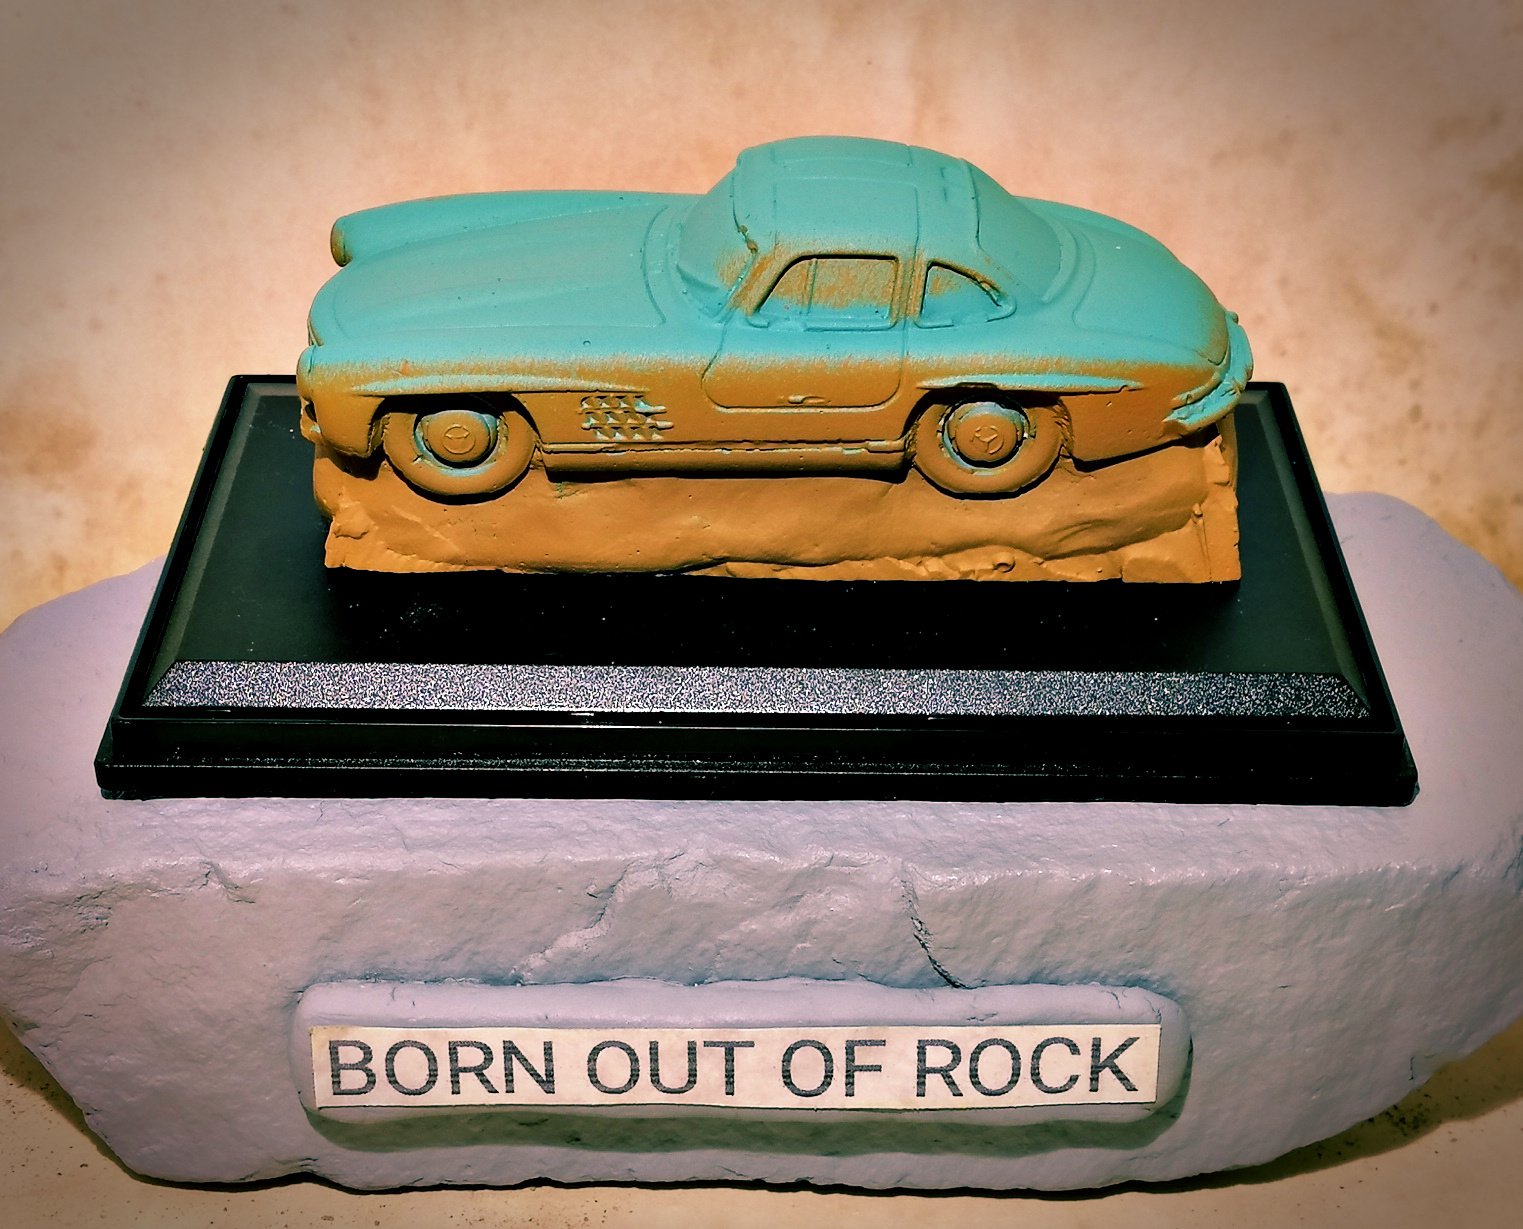 Roland Van Ast; Born Out Of Rock Mercedes 1, 2020, Original Ceramics Handbuilt, 4.6 x 1.6 inches. Artwork description: 241 Born out of Rock by Mad MouseMercedes 300 SL- Handmade modelcars- Born out of Rock series- 1 of only 50- Scale 143- 10 cm 150 gr- Handmade mold- Cast porcelain plaster- Sculpted model- Hand painted- Protective layer- Showcase box- Small series, special colors and models on ...